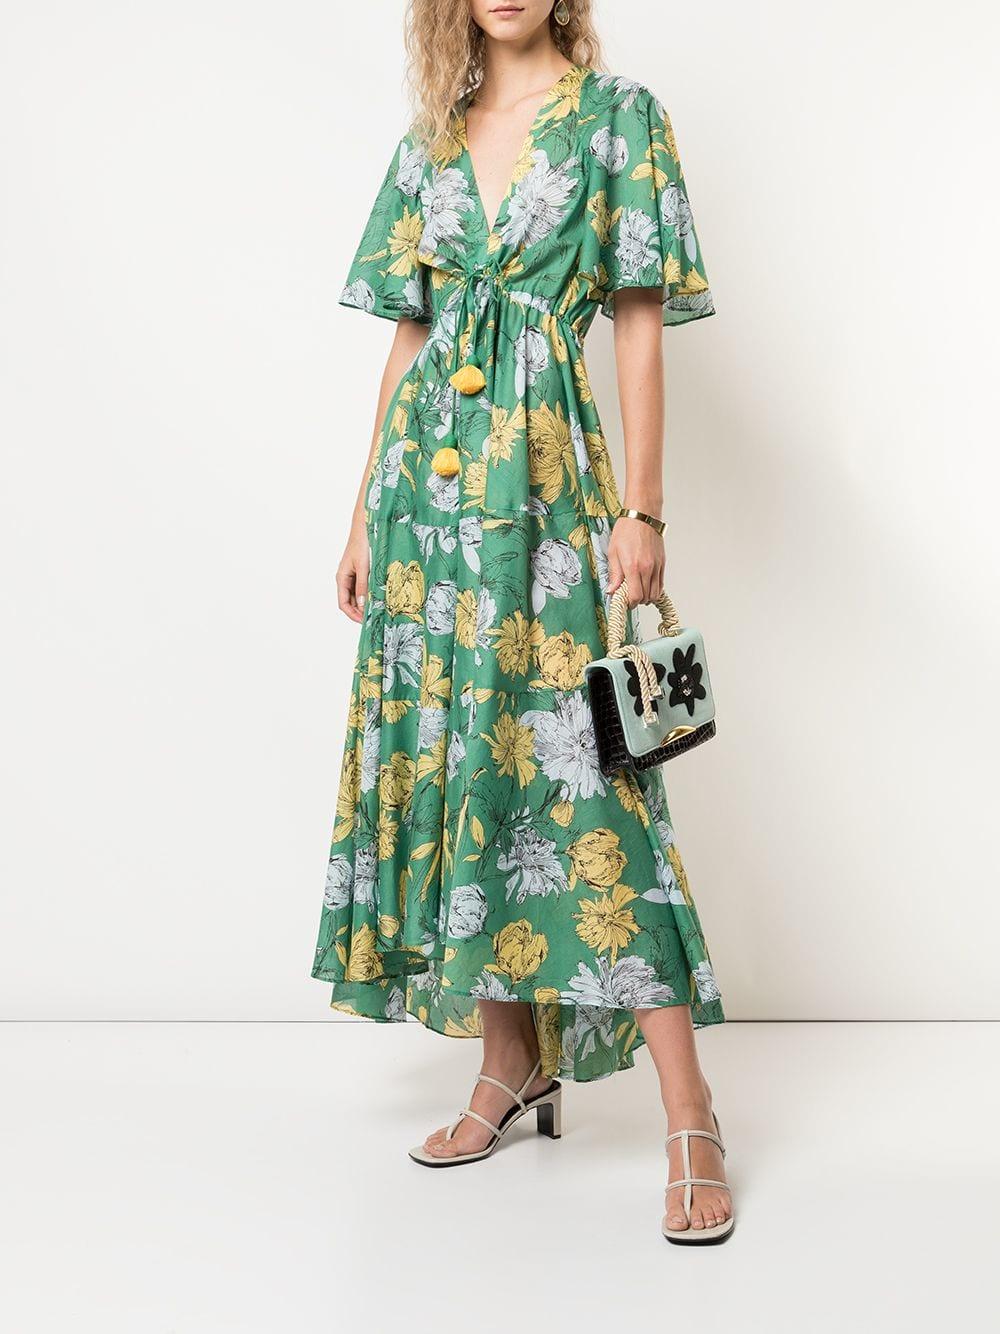 Alexis Cotton Adhara Dress in Green - Lyst